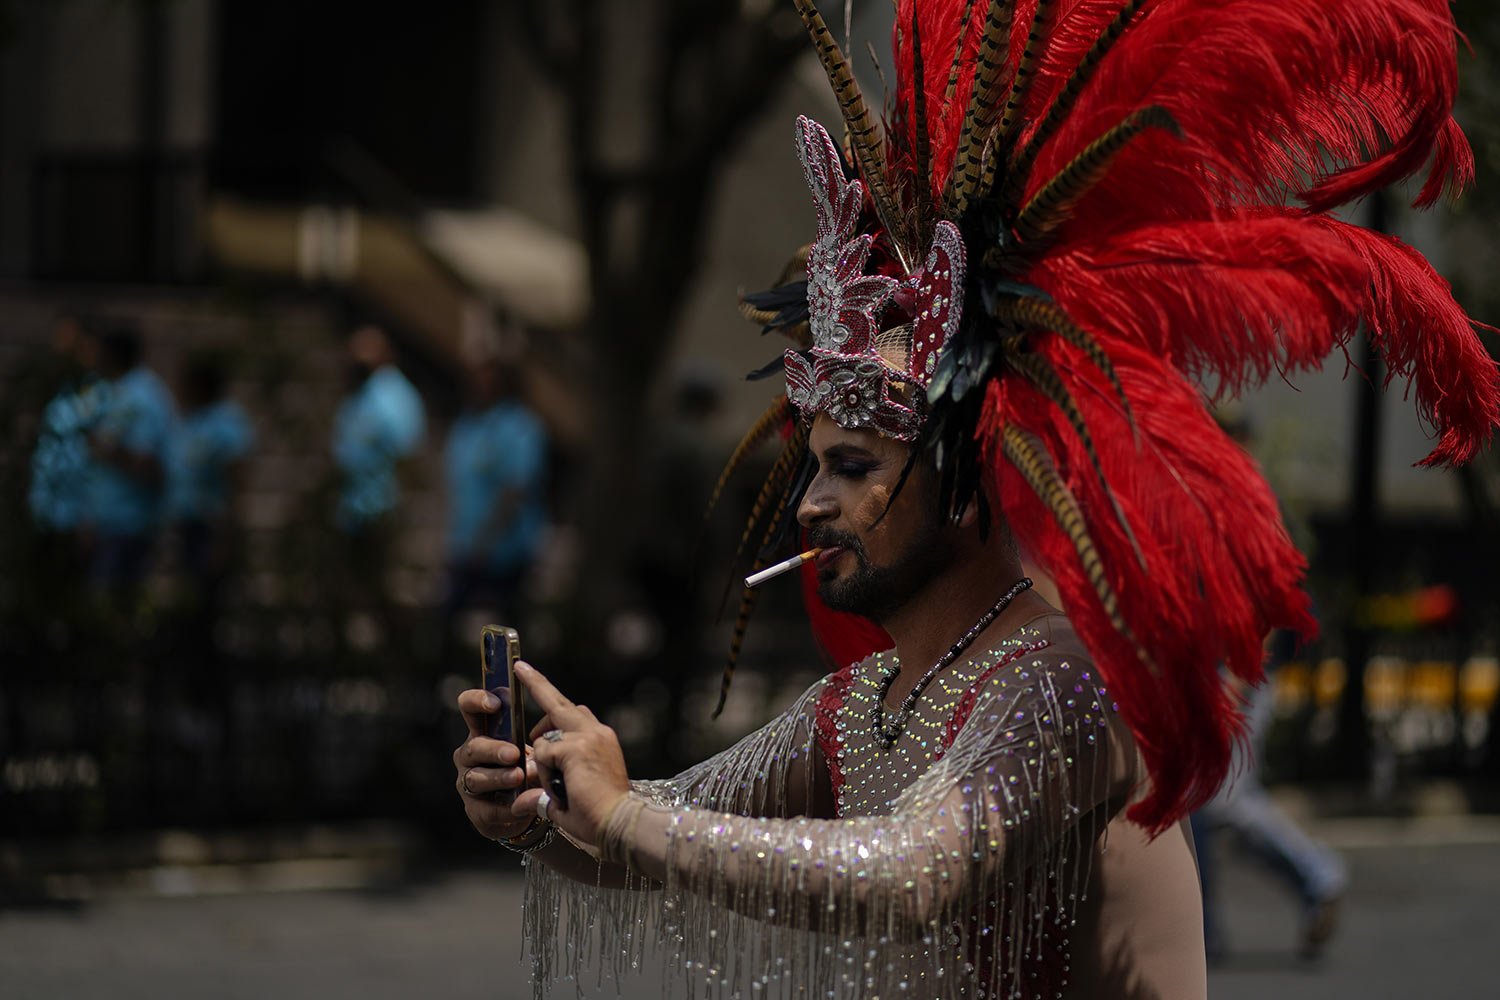  Wearing an Aztec headdress and smoking a cigarette, a participant poses for a selfie while taking part in the annual Pride march in Mexico City, Saturday, June 25, 2022. (AP Photo/Eduardo Verdugo) 